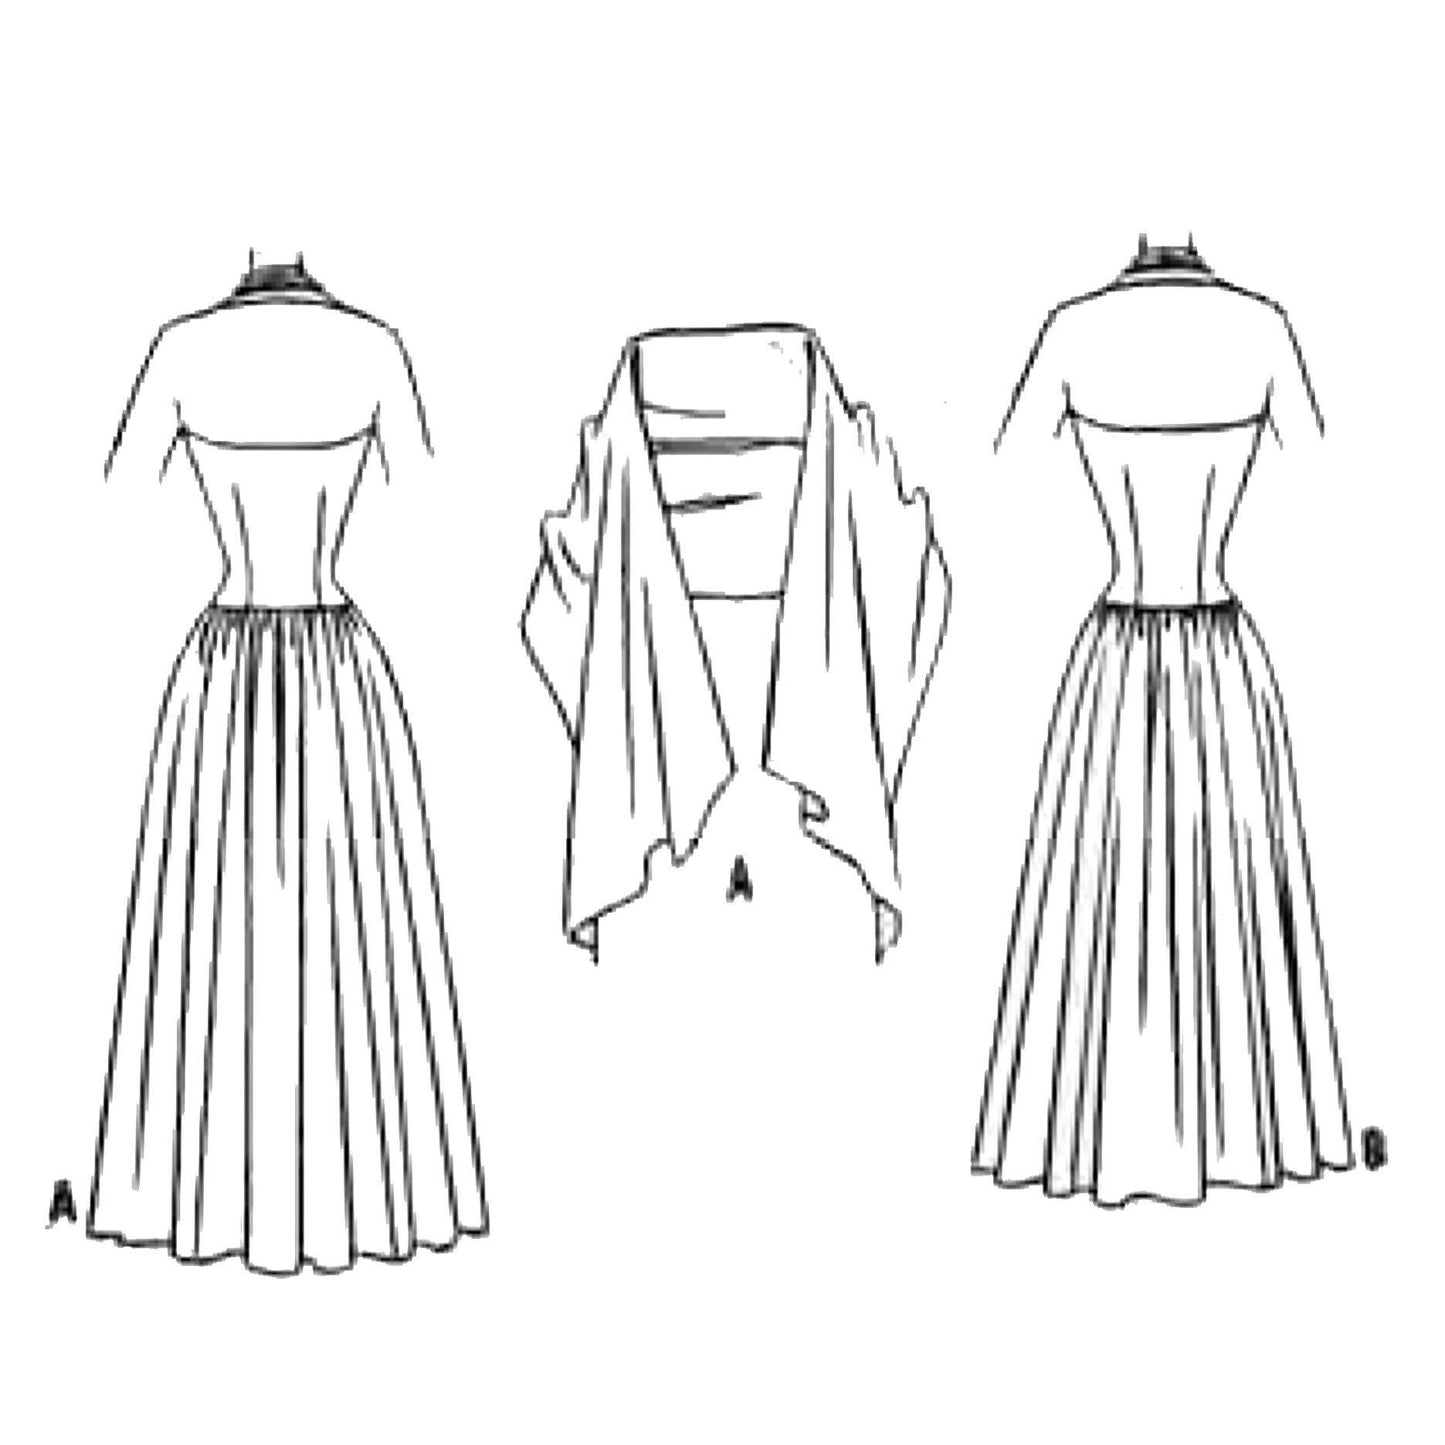 Line drawings of dress and stole.